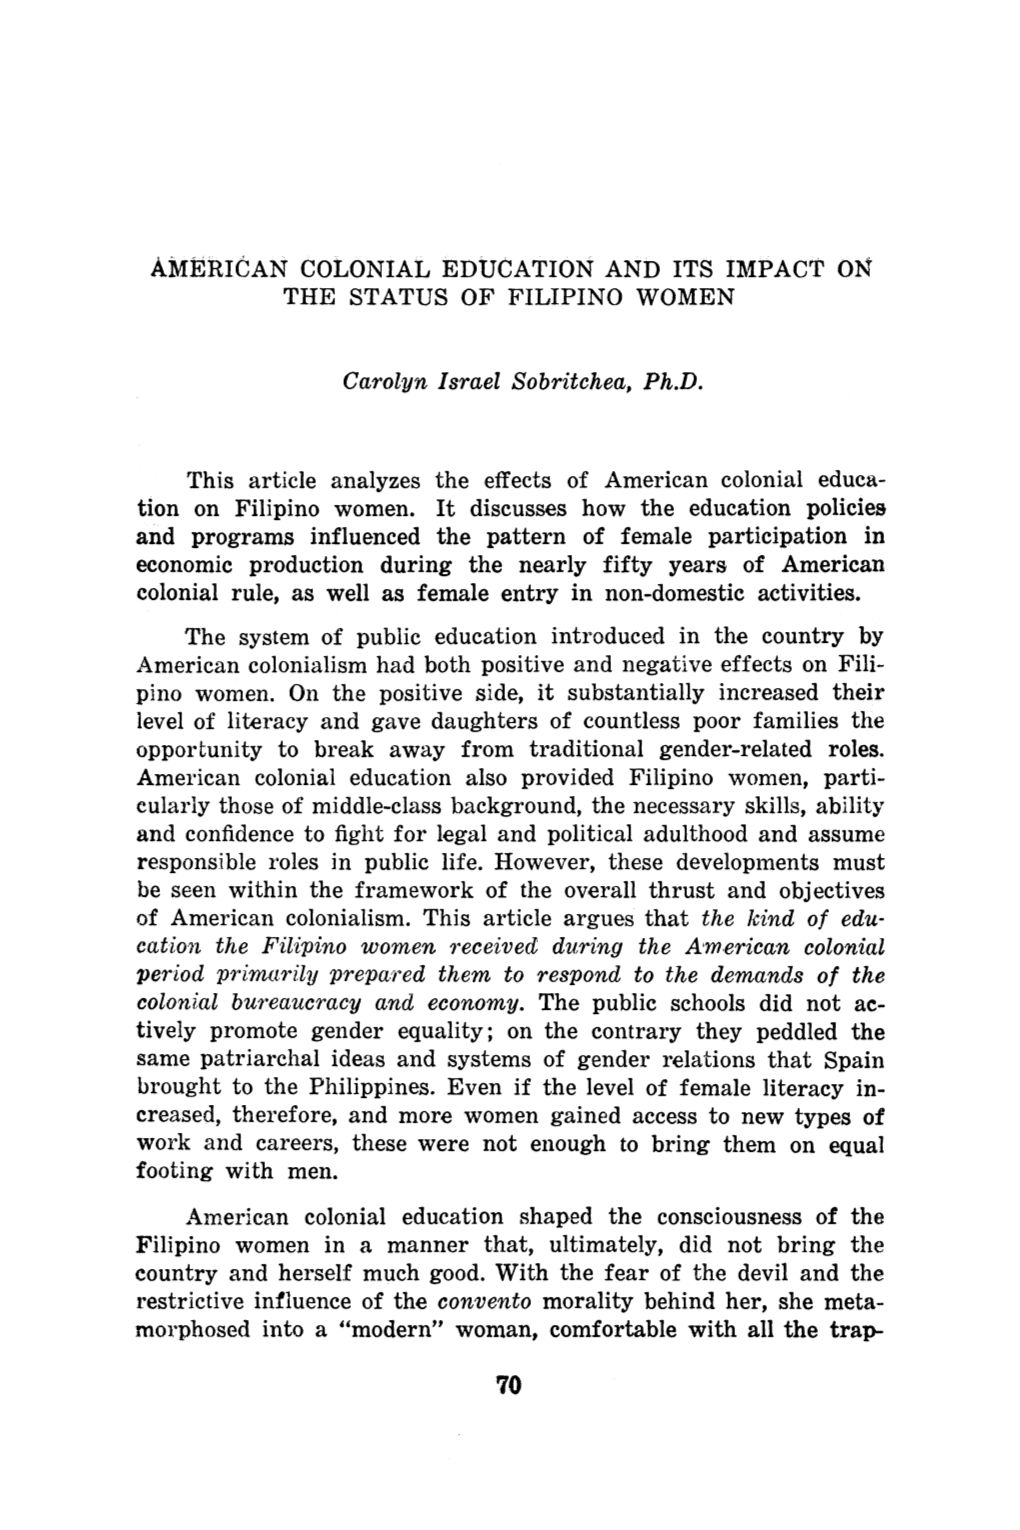 American Colonial Education and Its Impact on the Status of Filipino Women